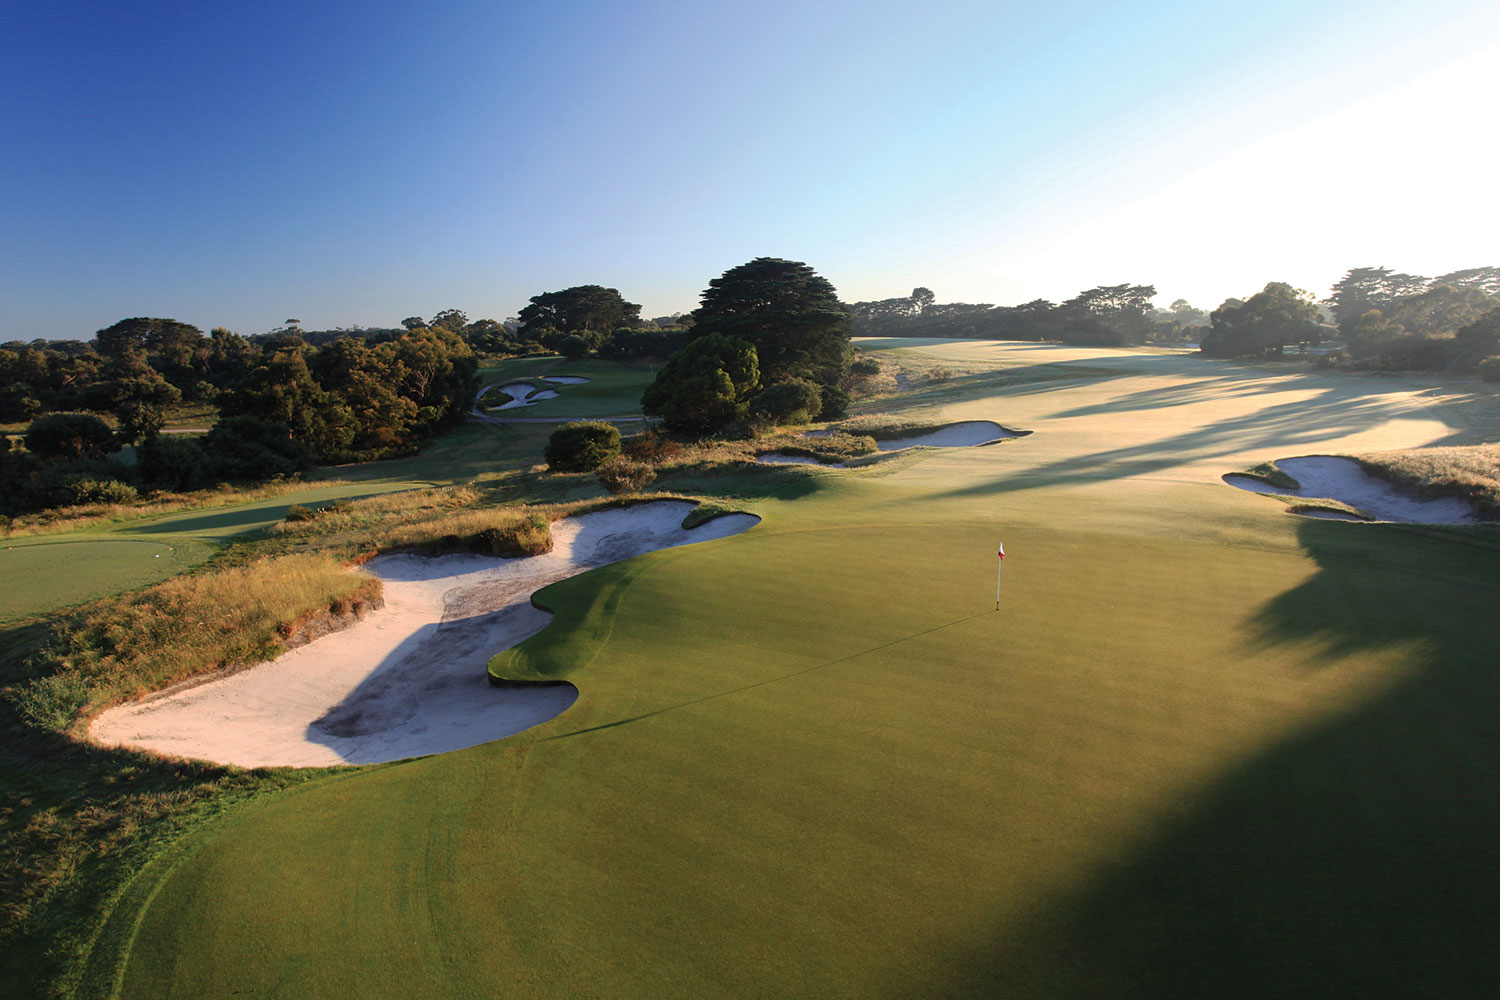 Take it to more host courses like Royal Melbourne, please!